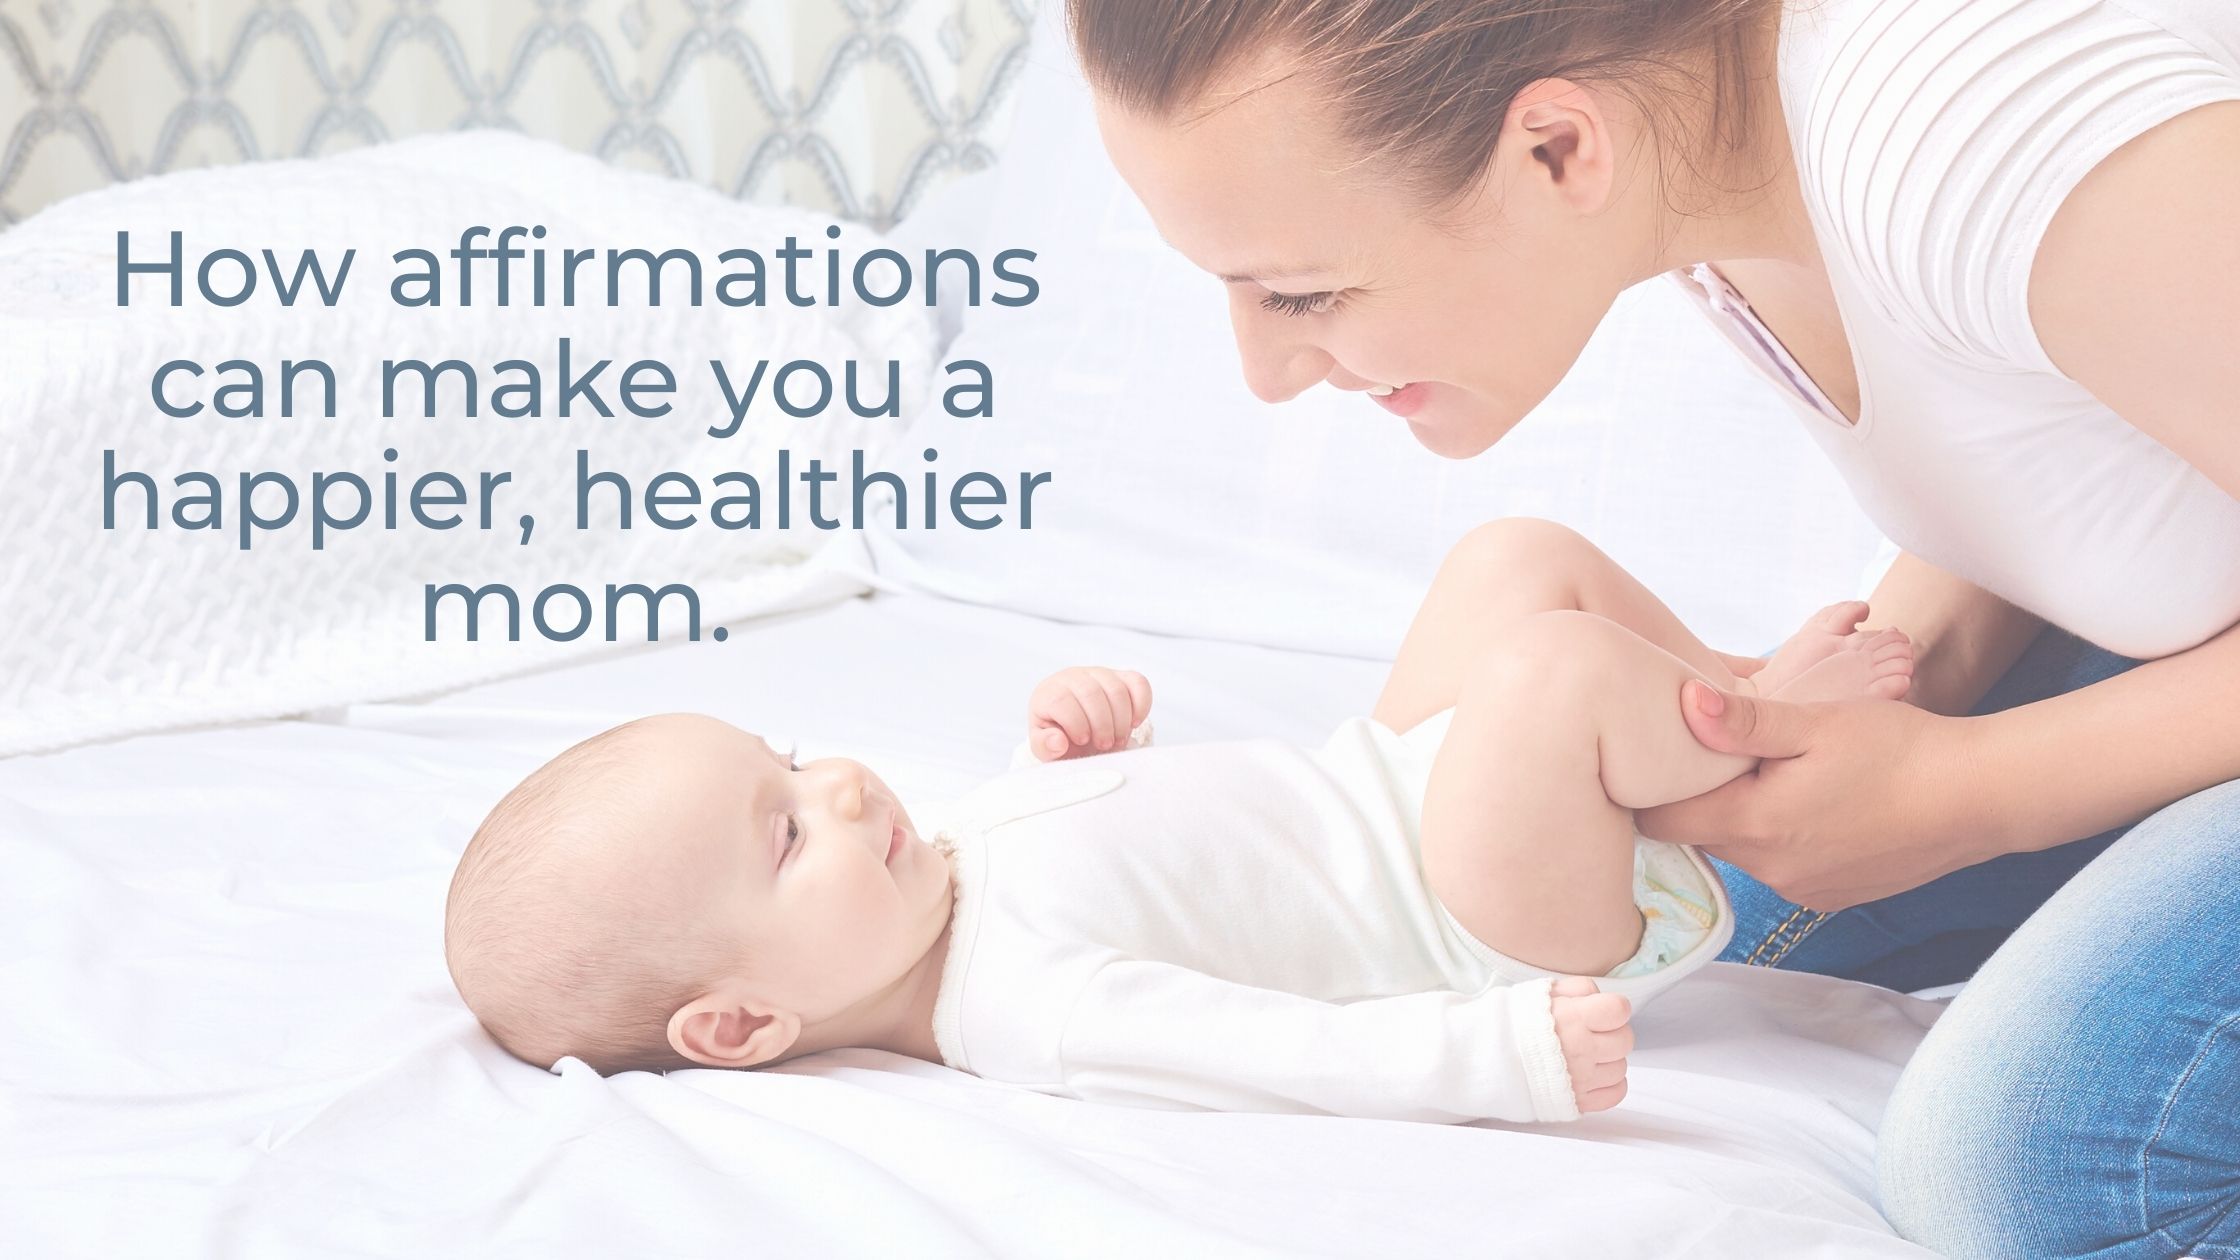 how affirmations can make you a happier, healthier mom cover image